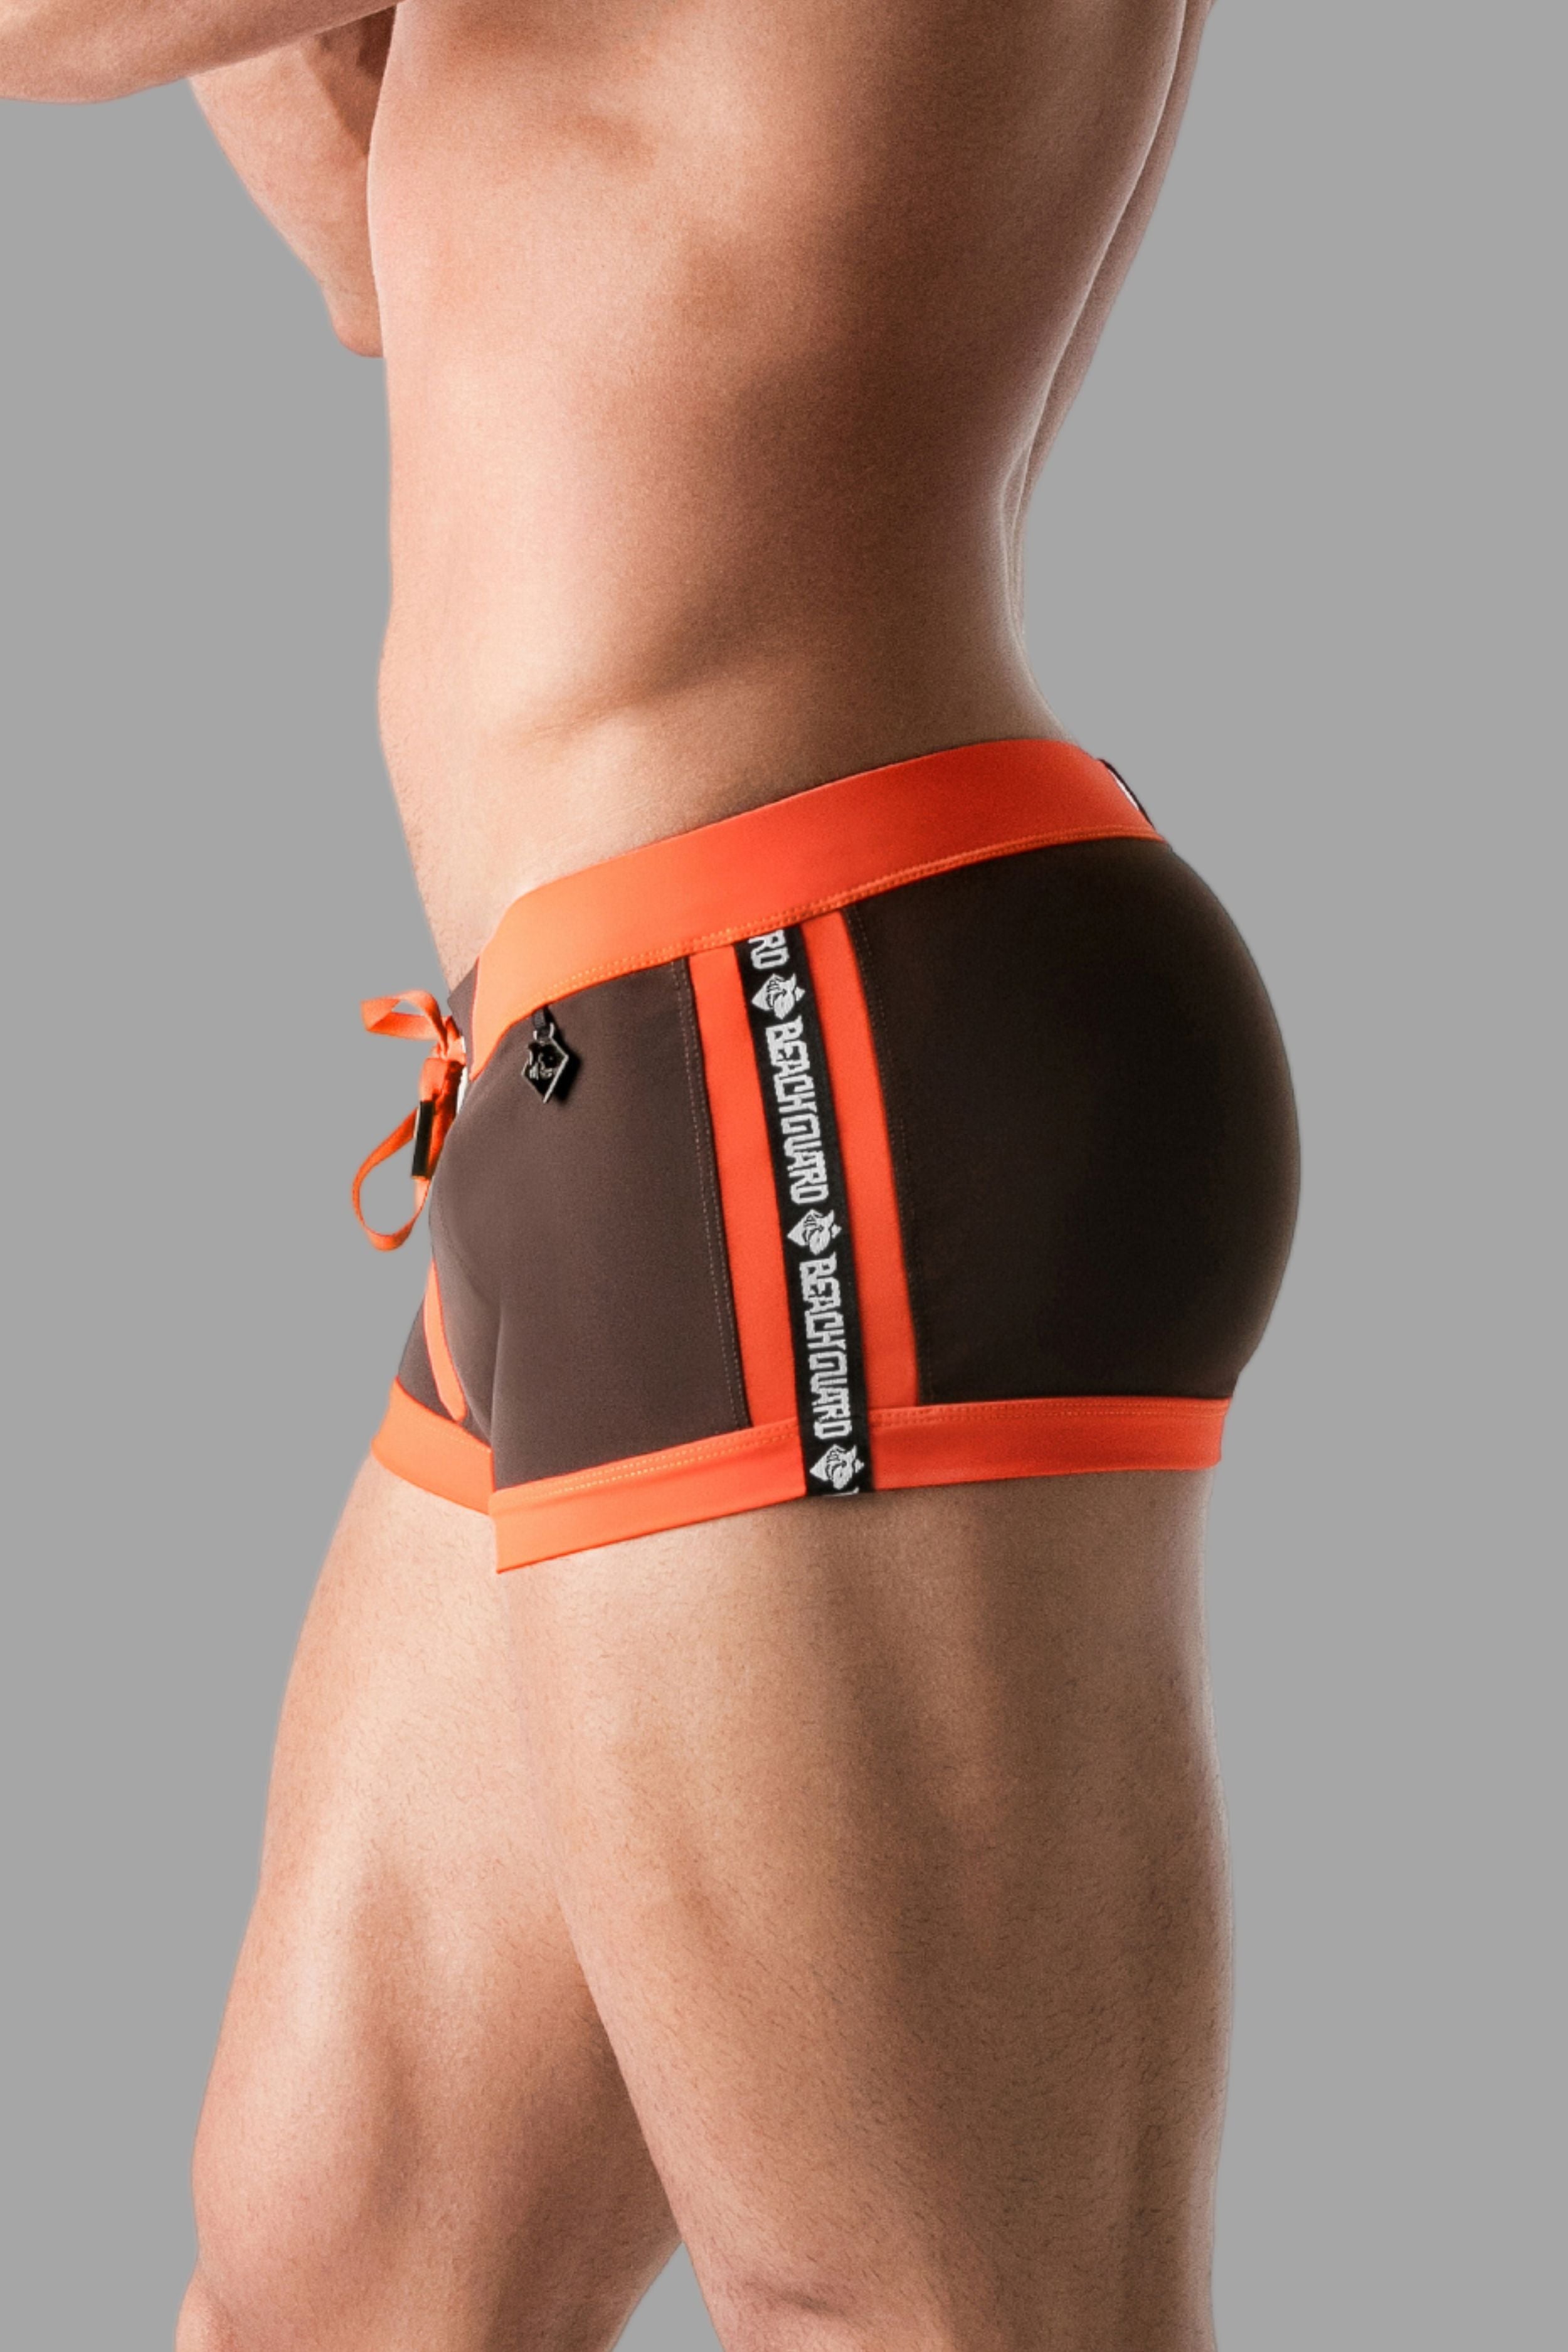 Swimming Trunk Shorts with Zip Imitation on the Front. Brown+Orange